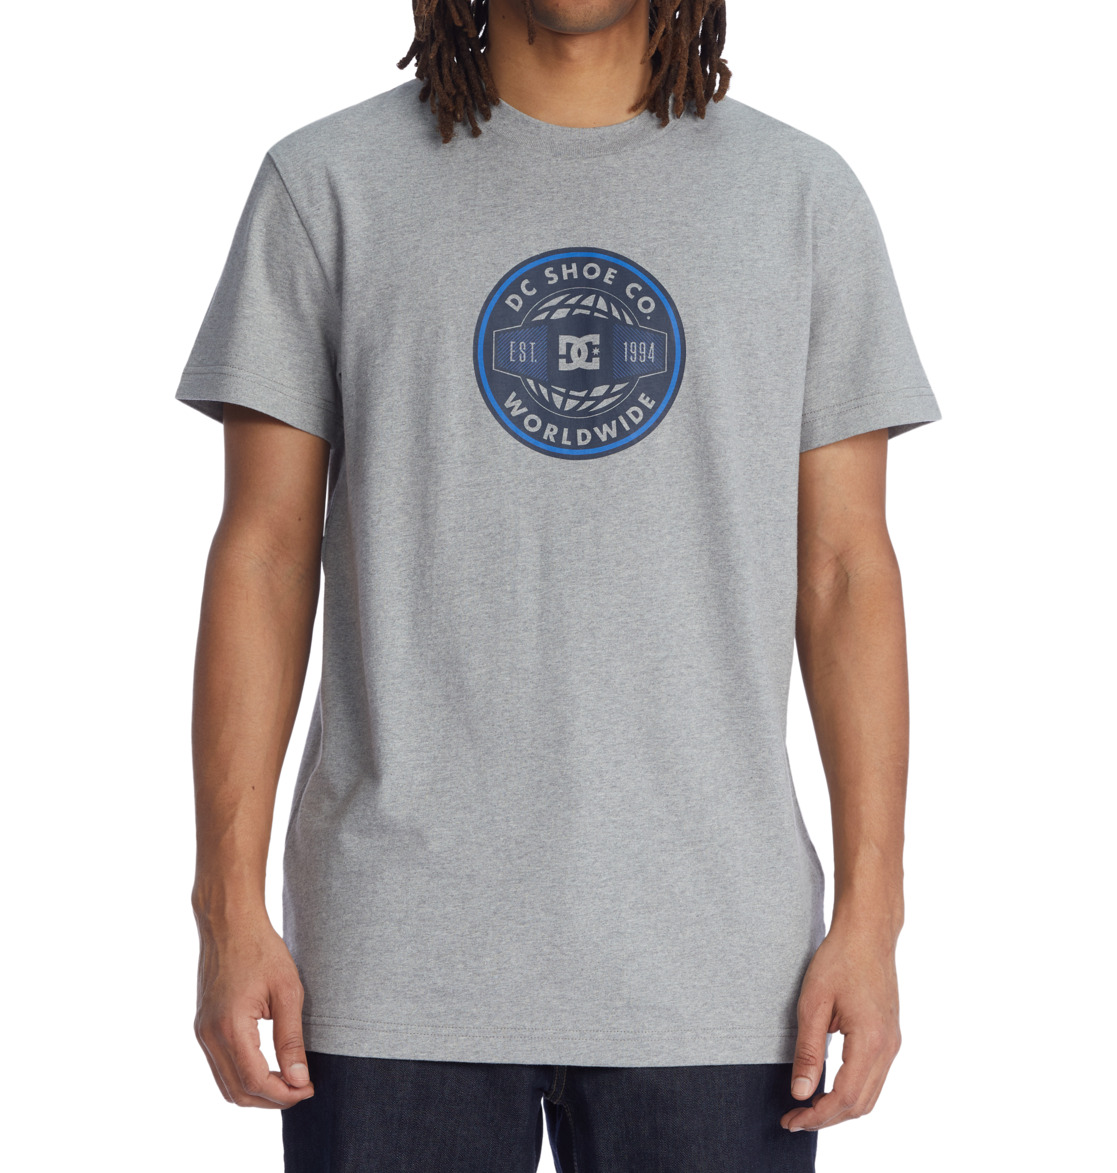 DC Shoes T-Shirt »Well Rounded« von DC Shoes